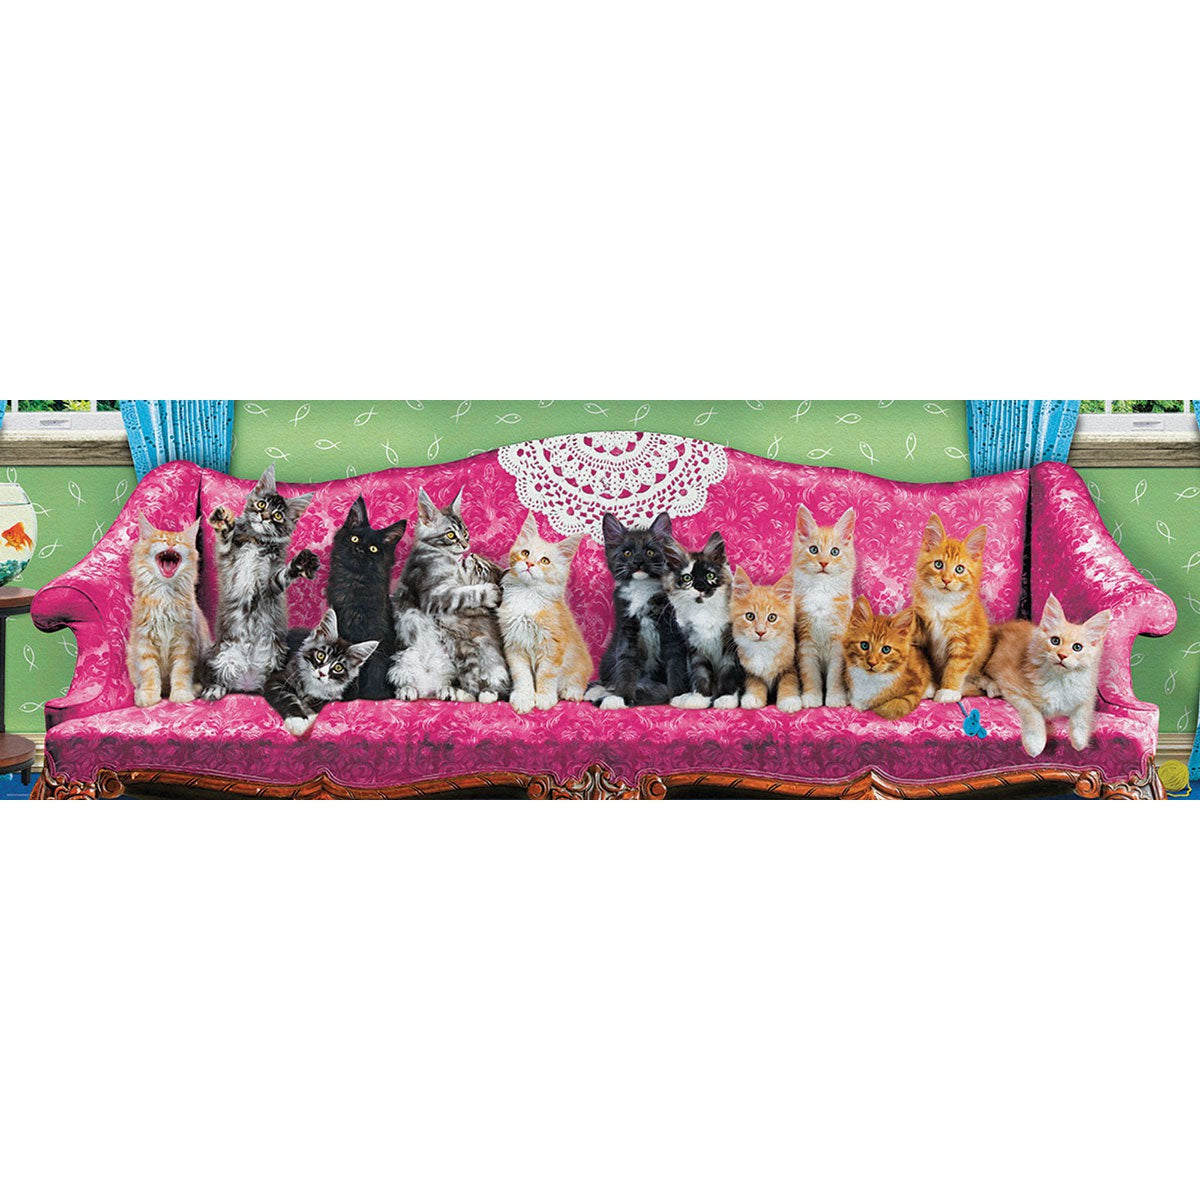 Kitty Cat Couch 1000 Piece Panoramic Jigsaw Puzzle Eurographics